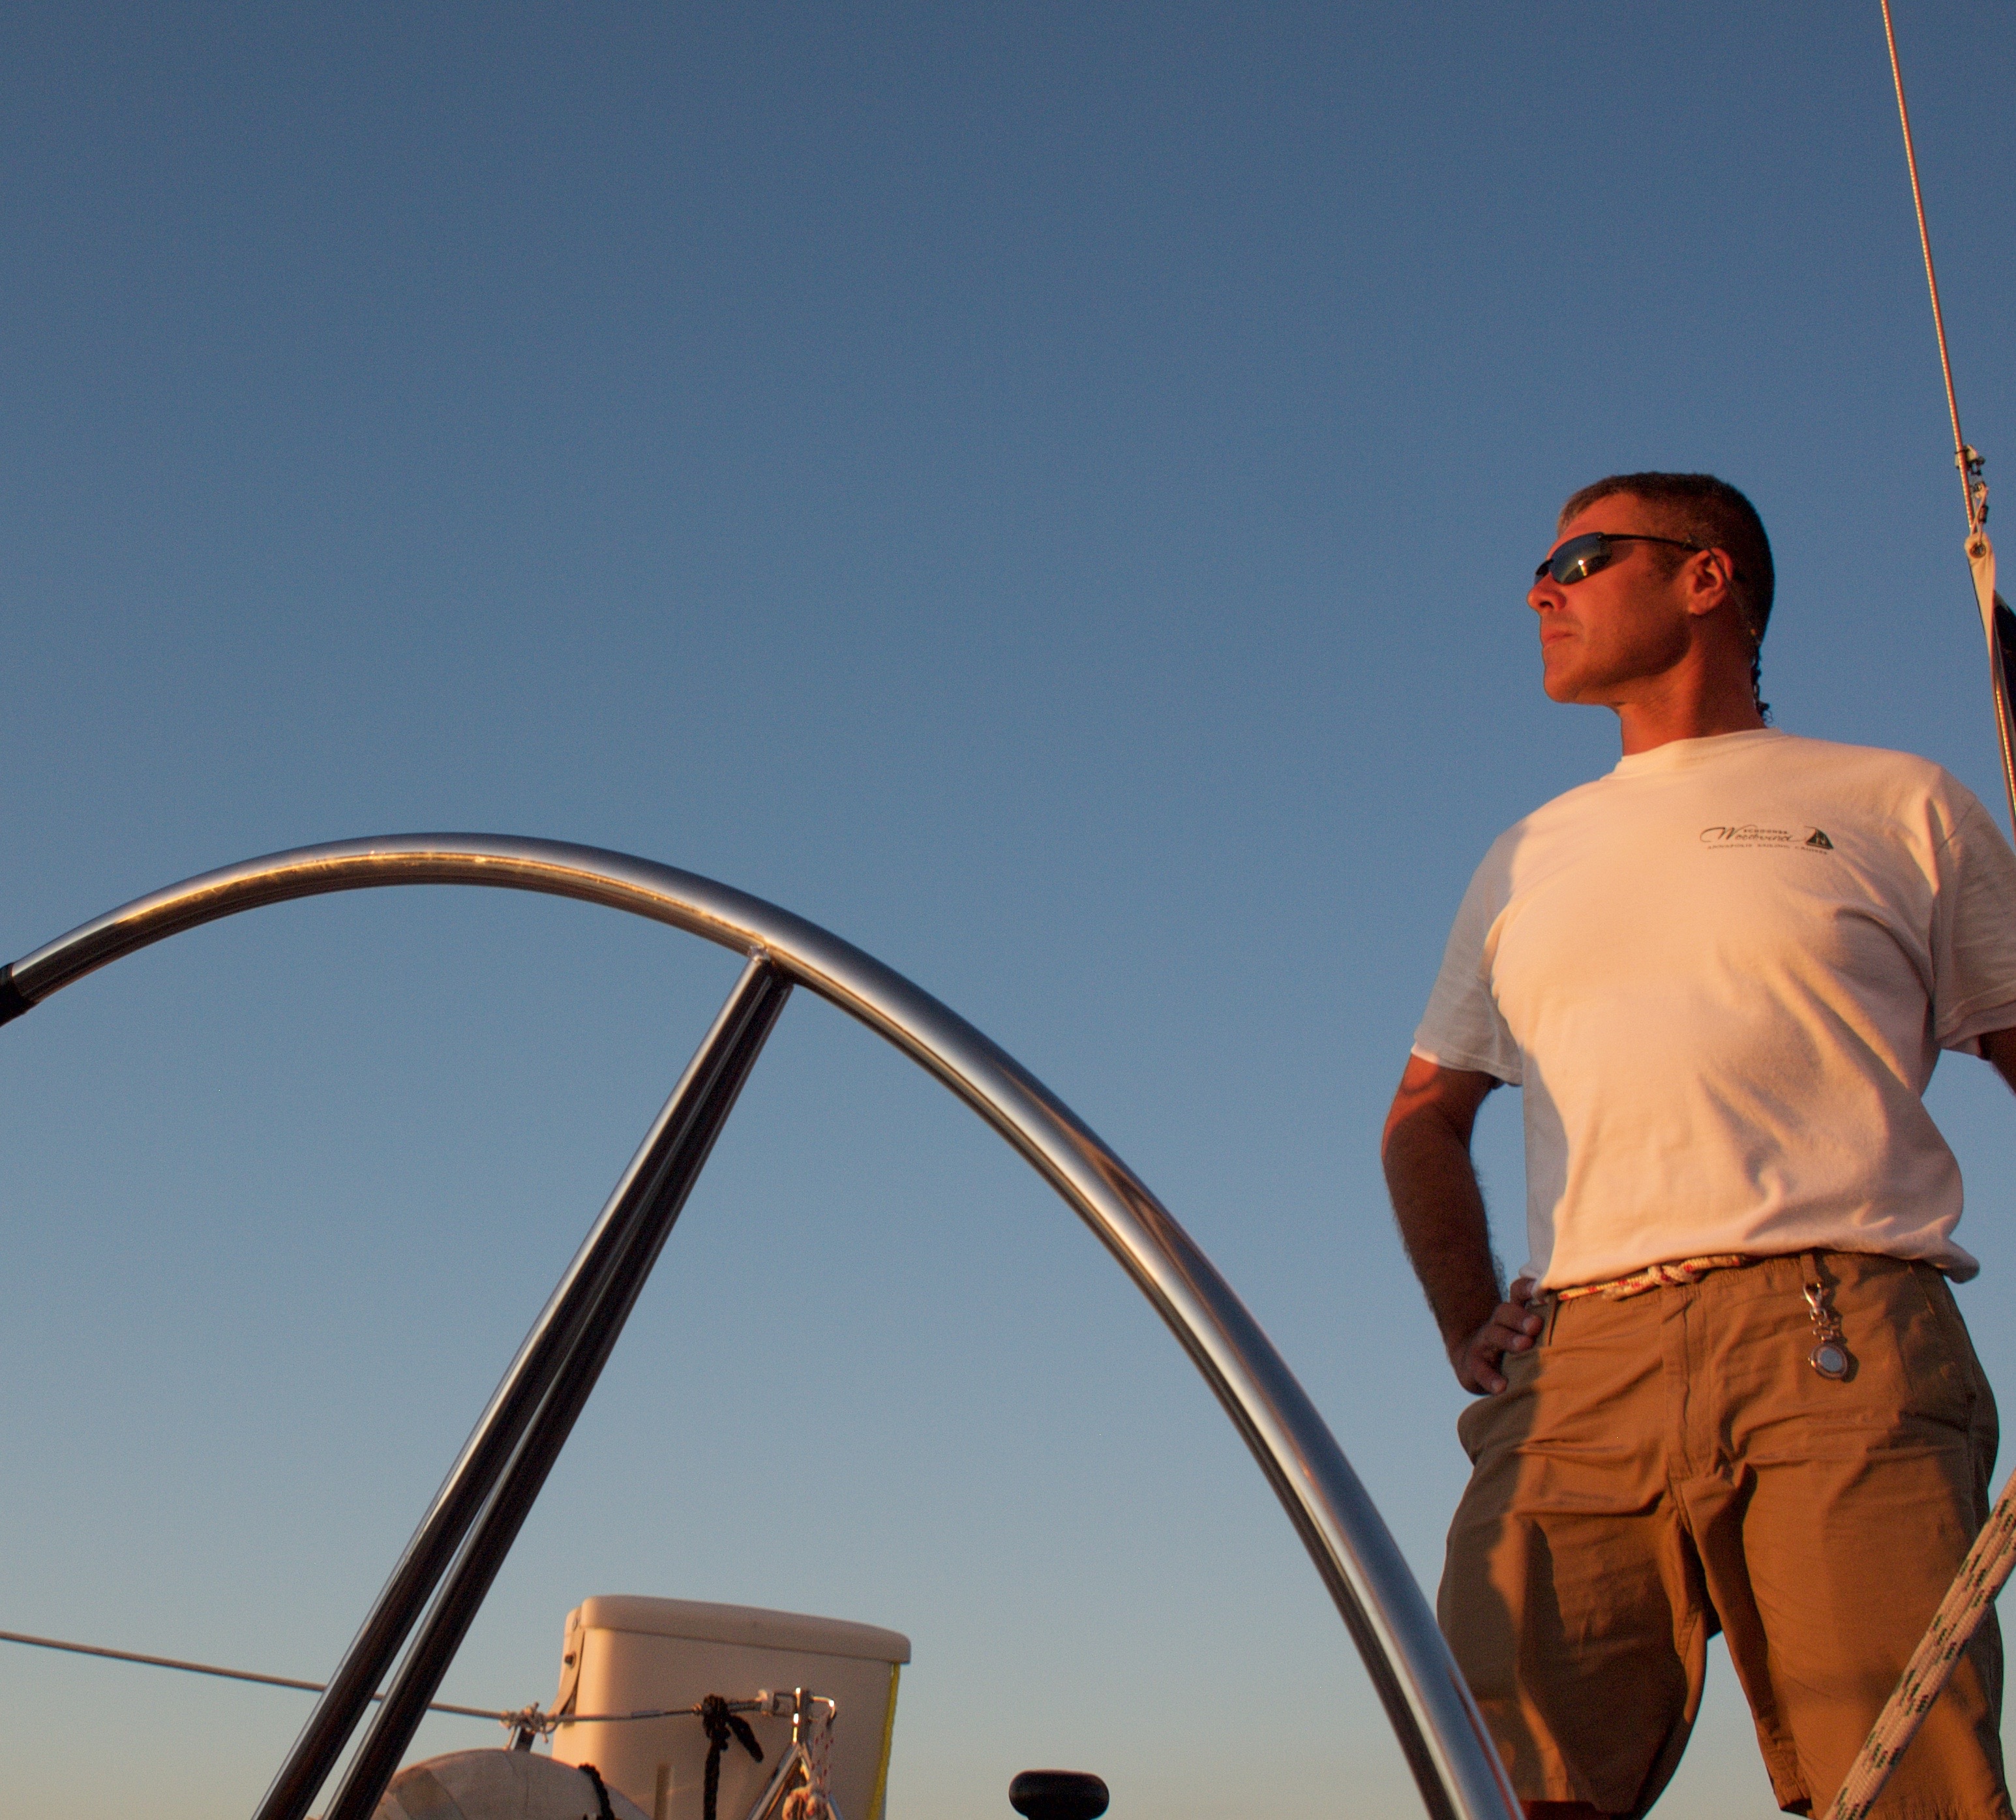 Captain at the helm 0f the schooner on a blue sky day